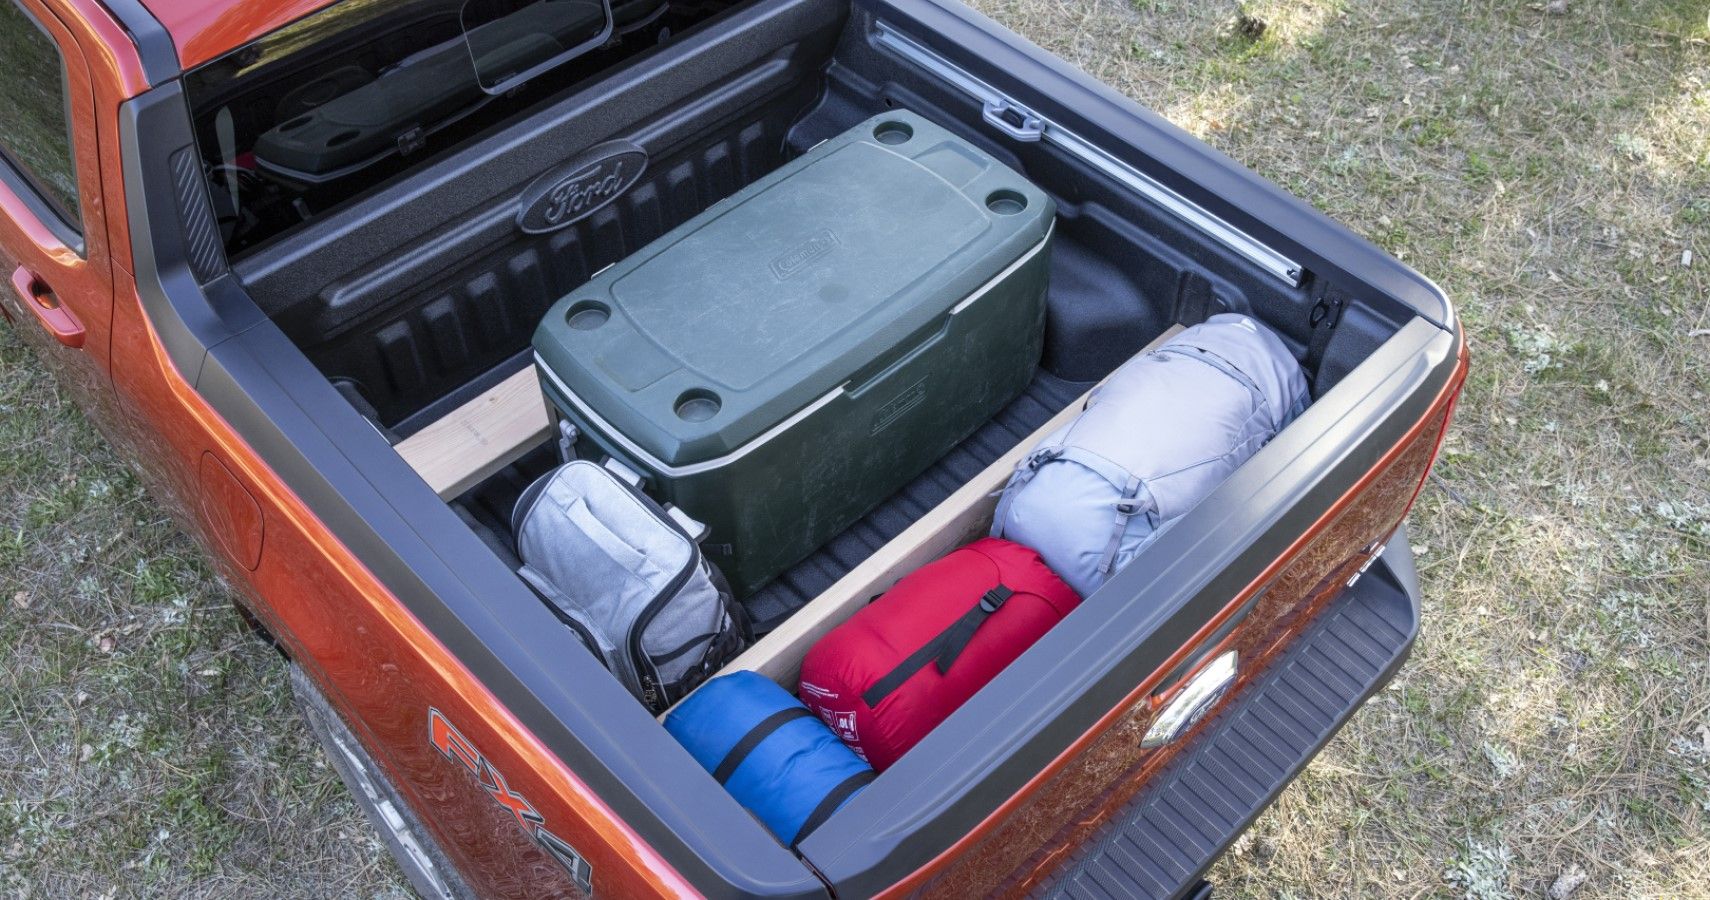 2022 Ford Maverick gets creases for curated cargo compartment options